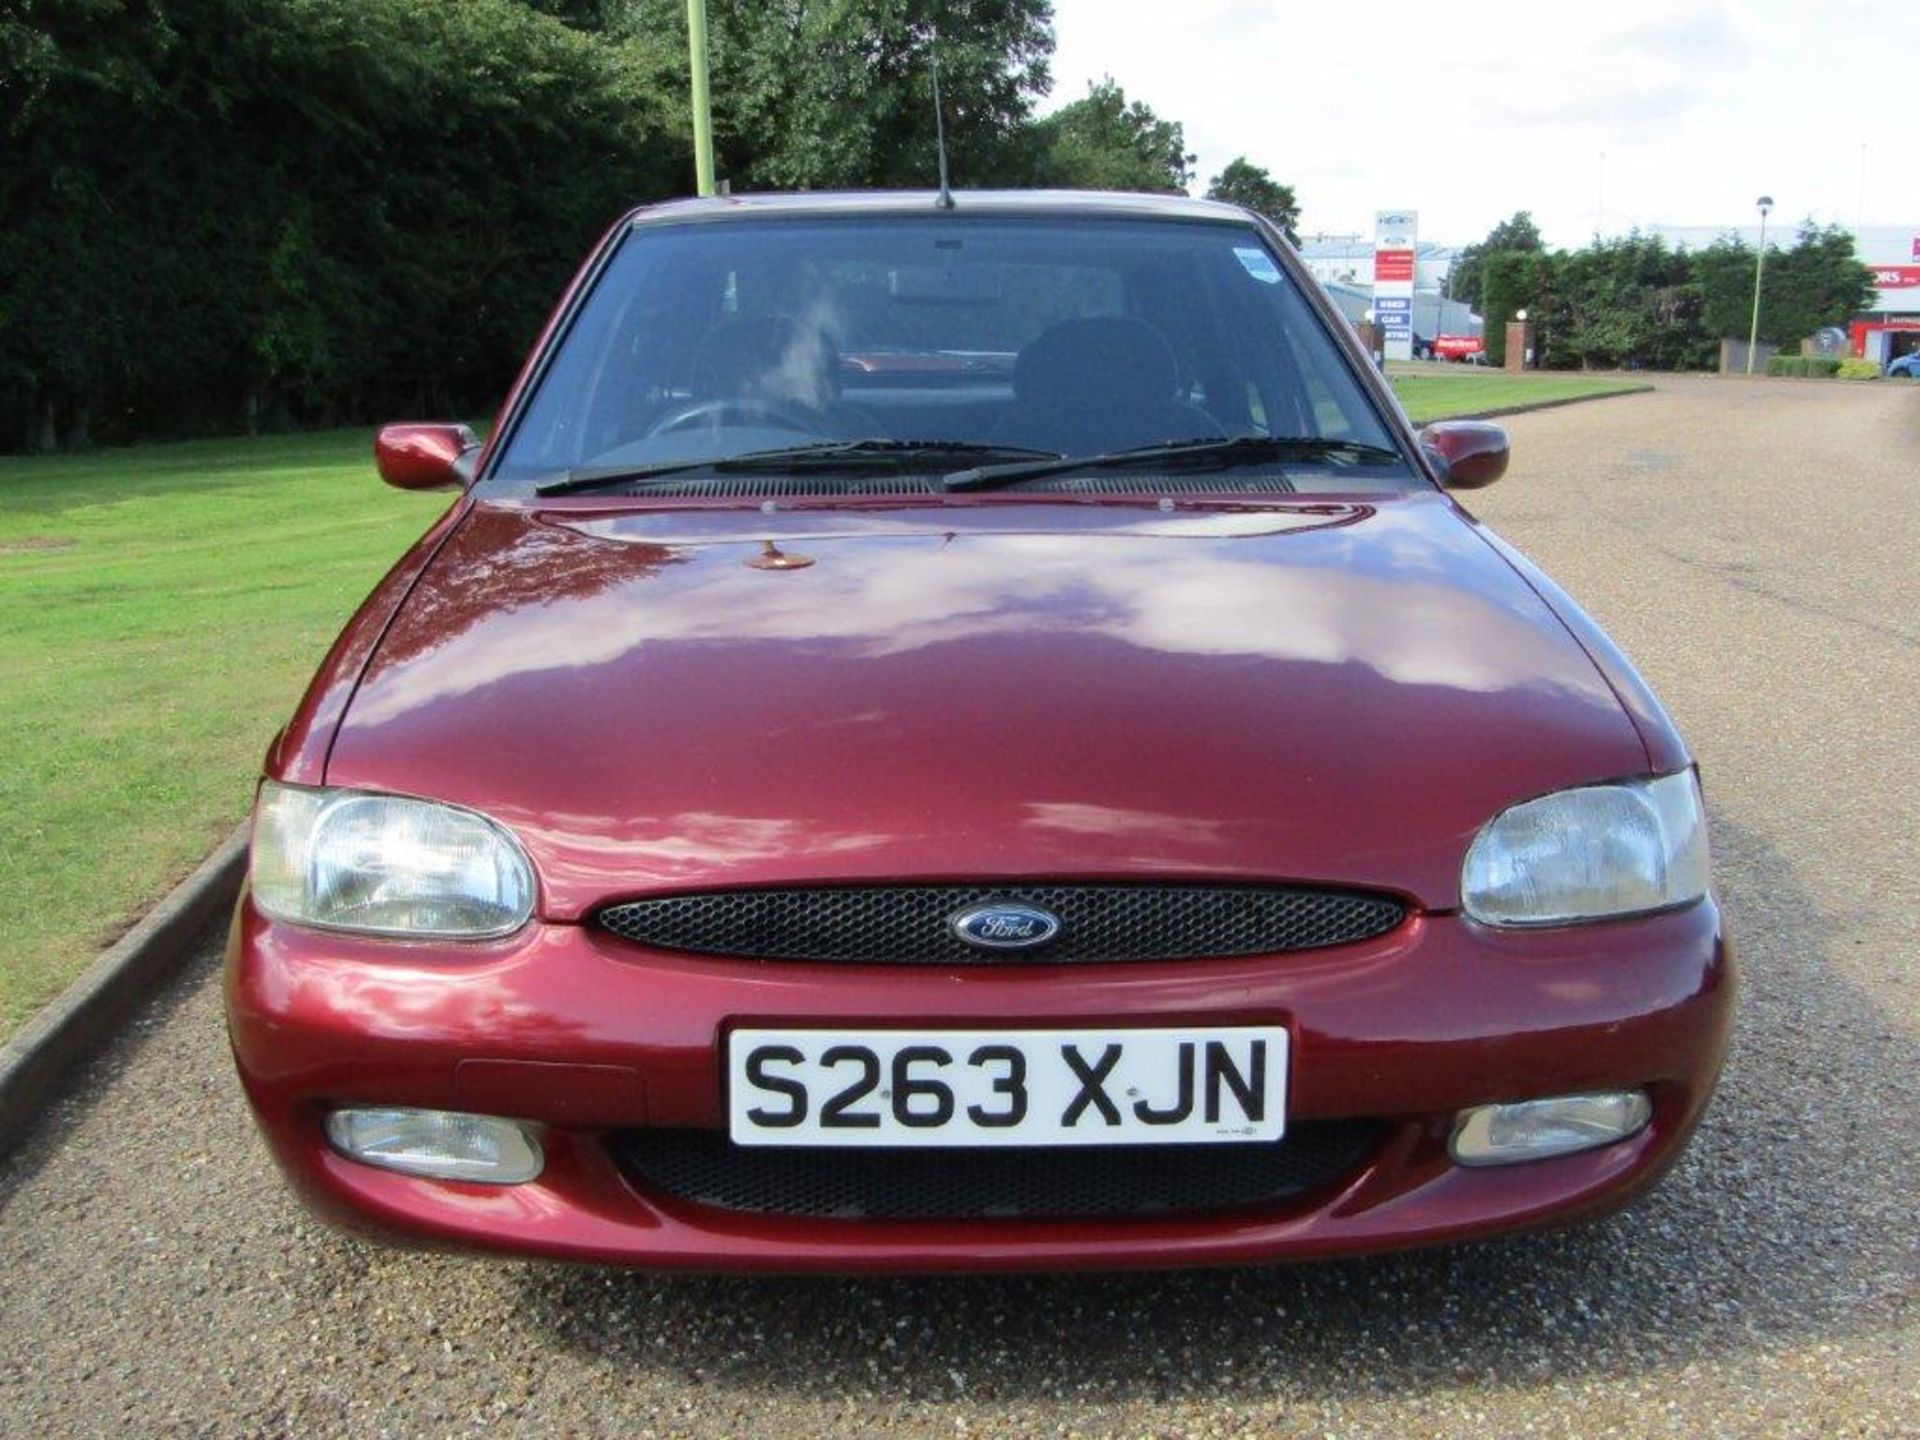 1999 Ford Escort 1.6 Finesse - Image 5 of 18